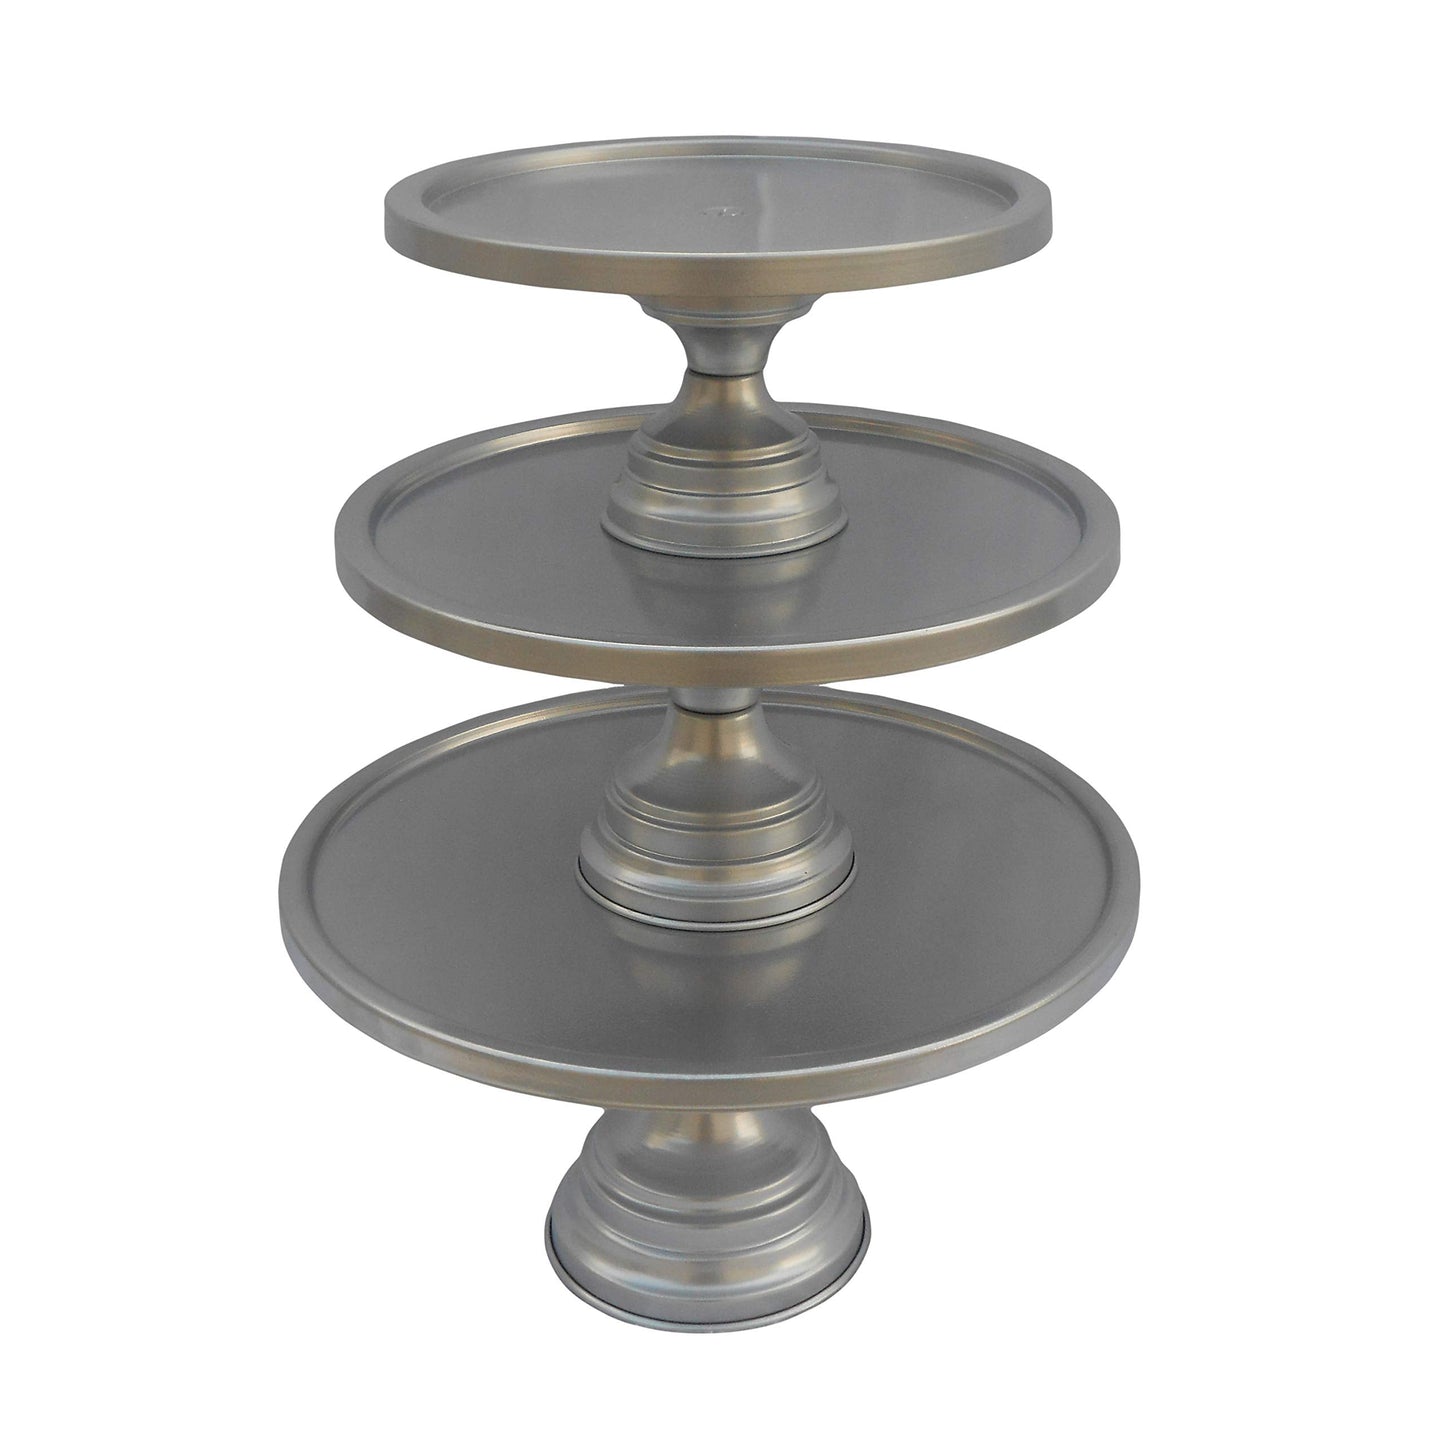 GiftBay Creations - Cake Stand Pedestal Round Strong Metal Set/3 (9-Inch, 11-Inch, 13-Inch, Silver)